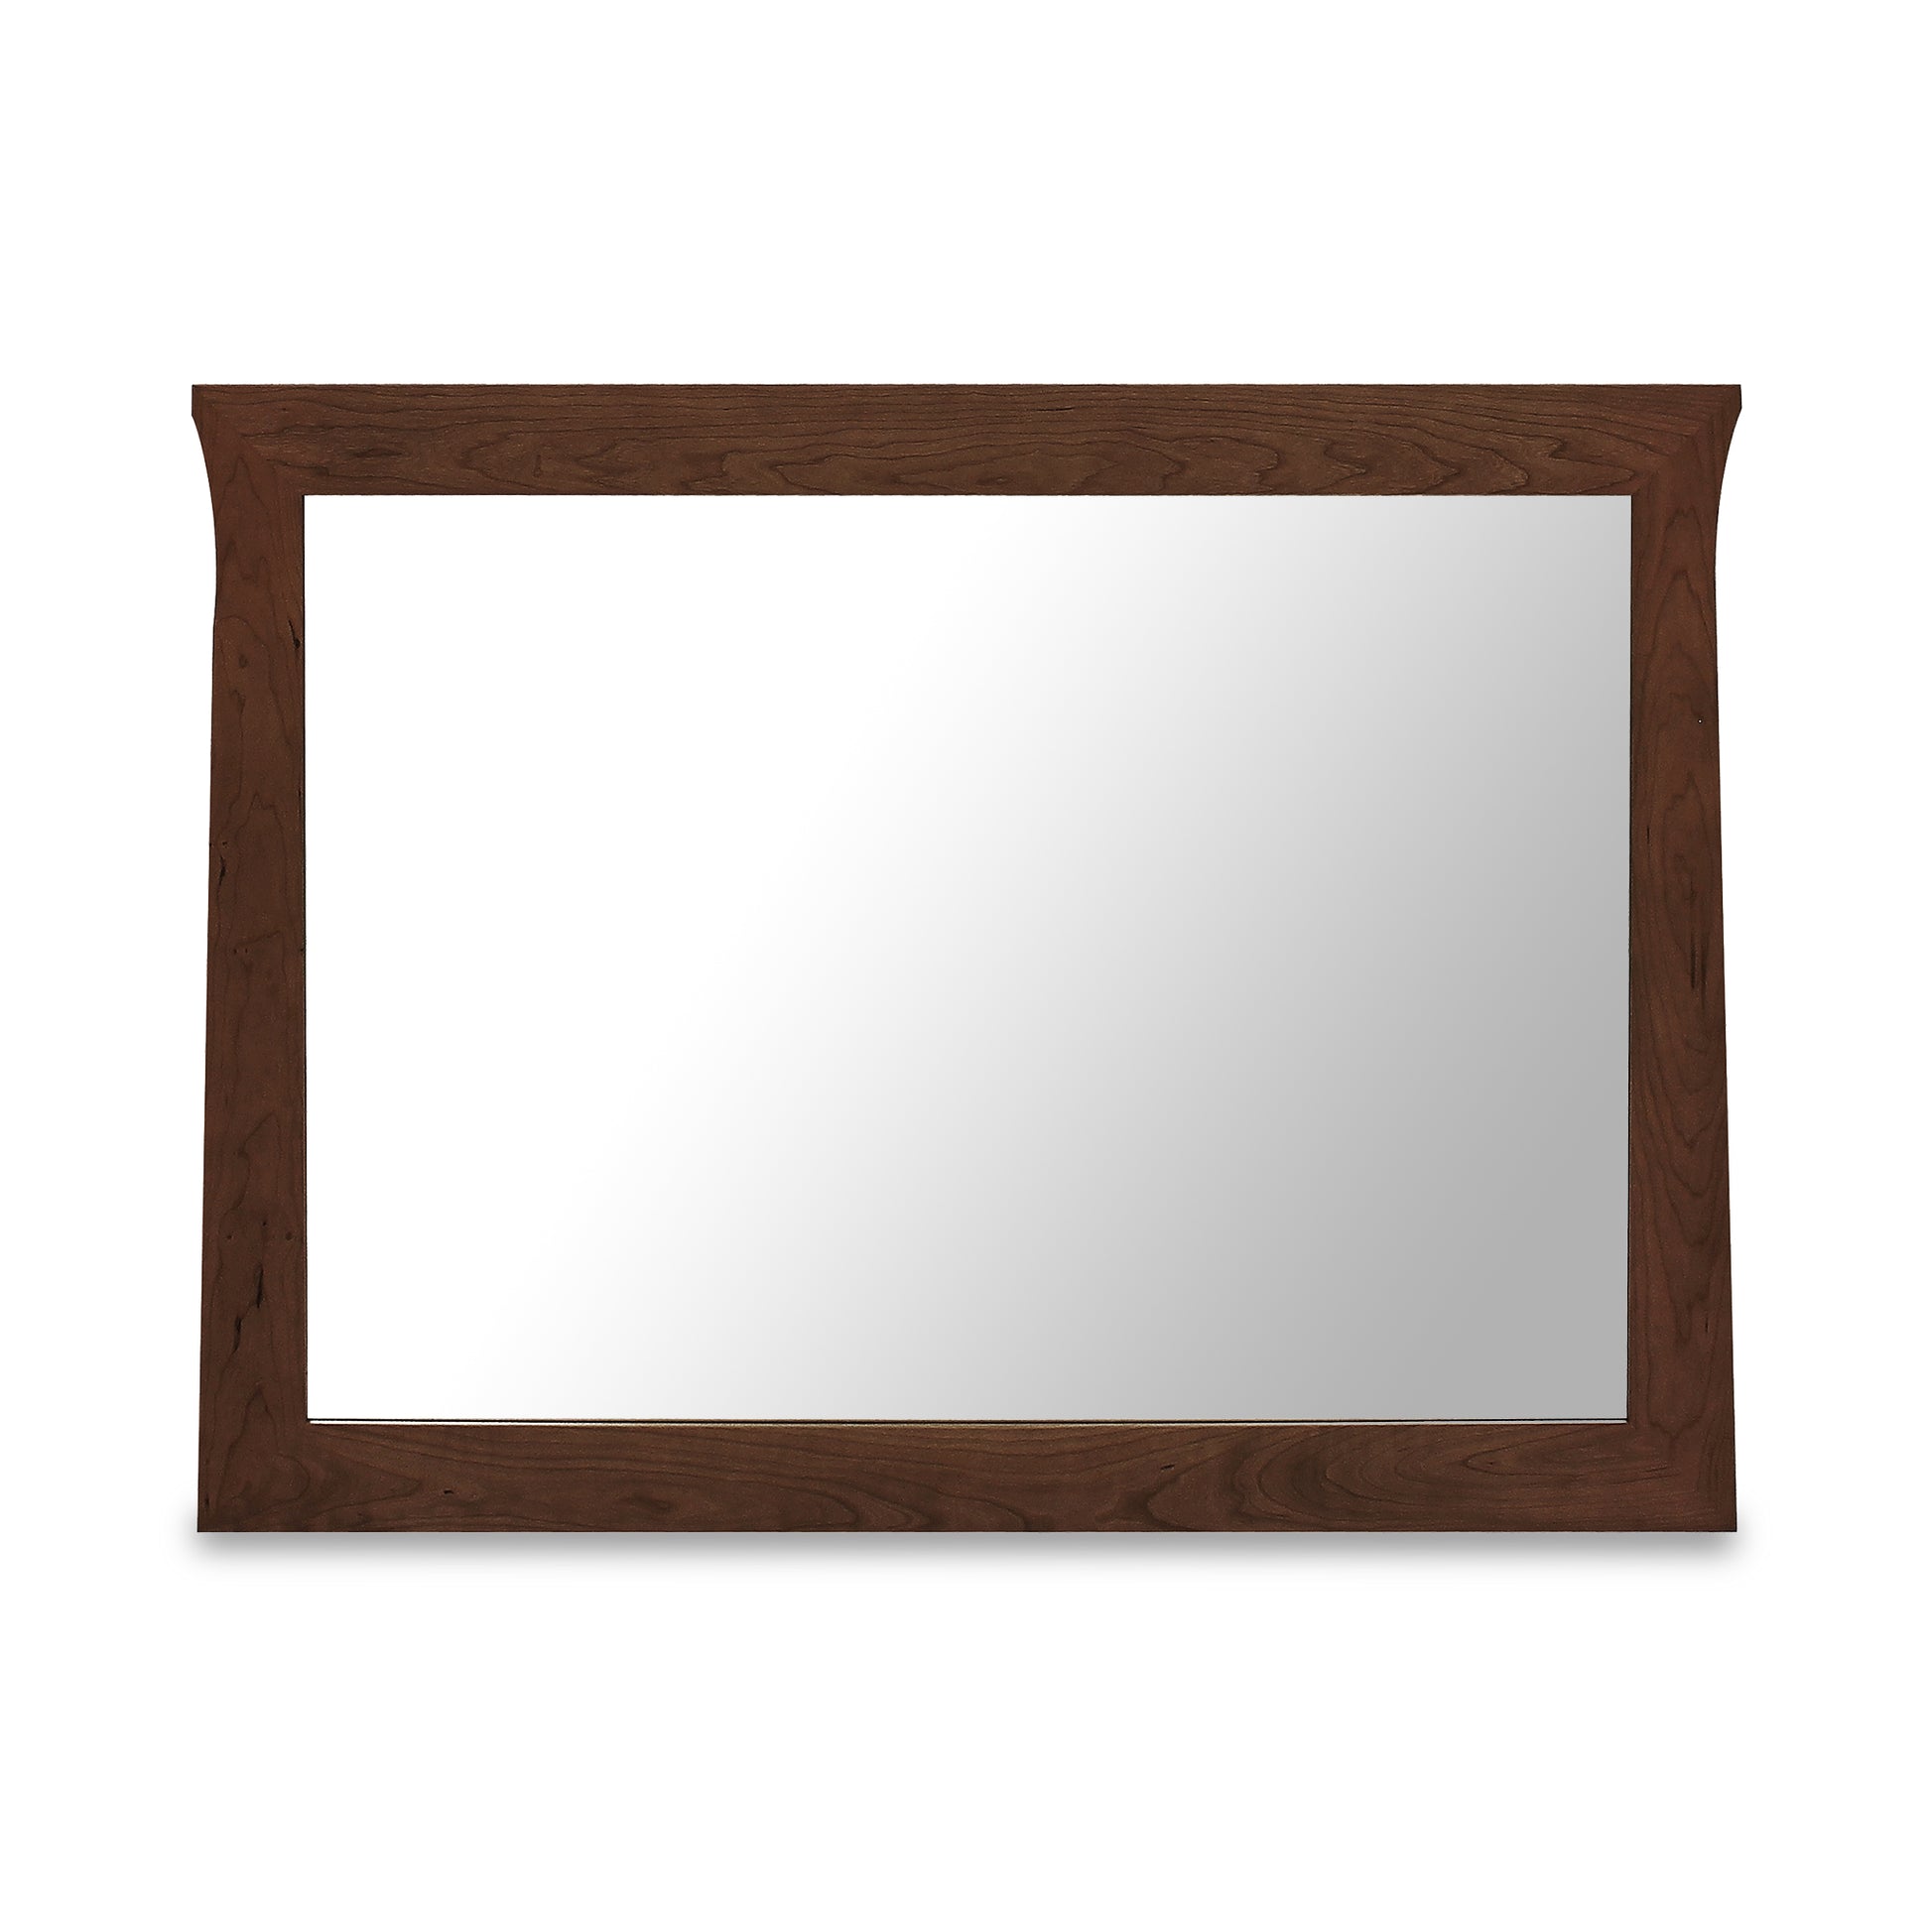 An Andrews Dresser Mirror by Lyndon Furniture on a white background.